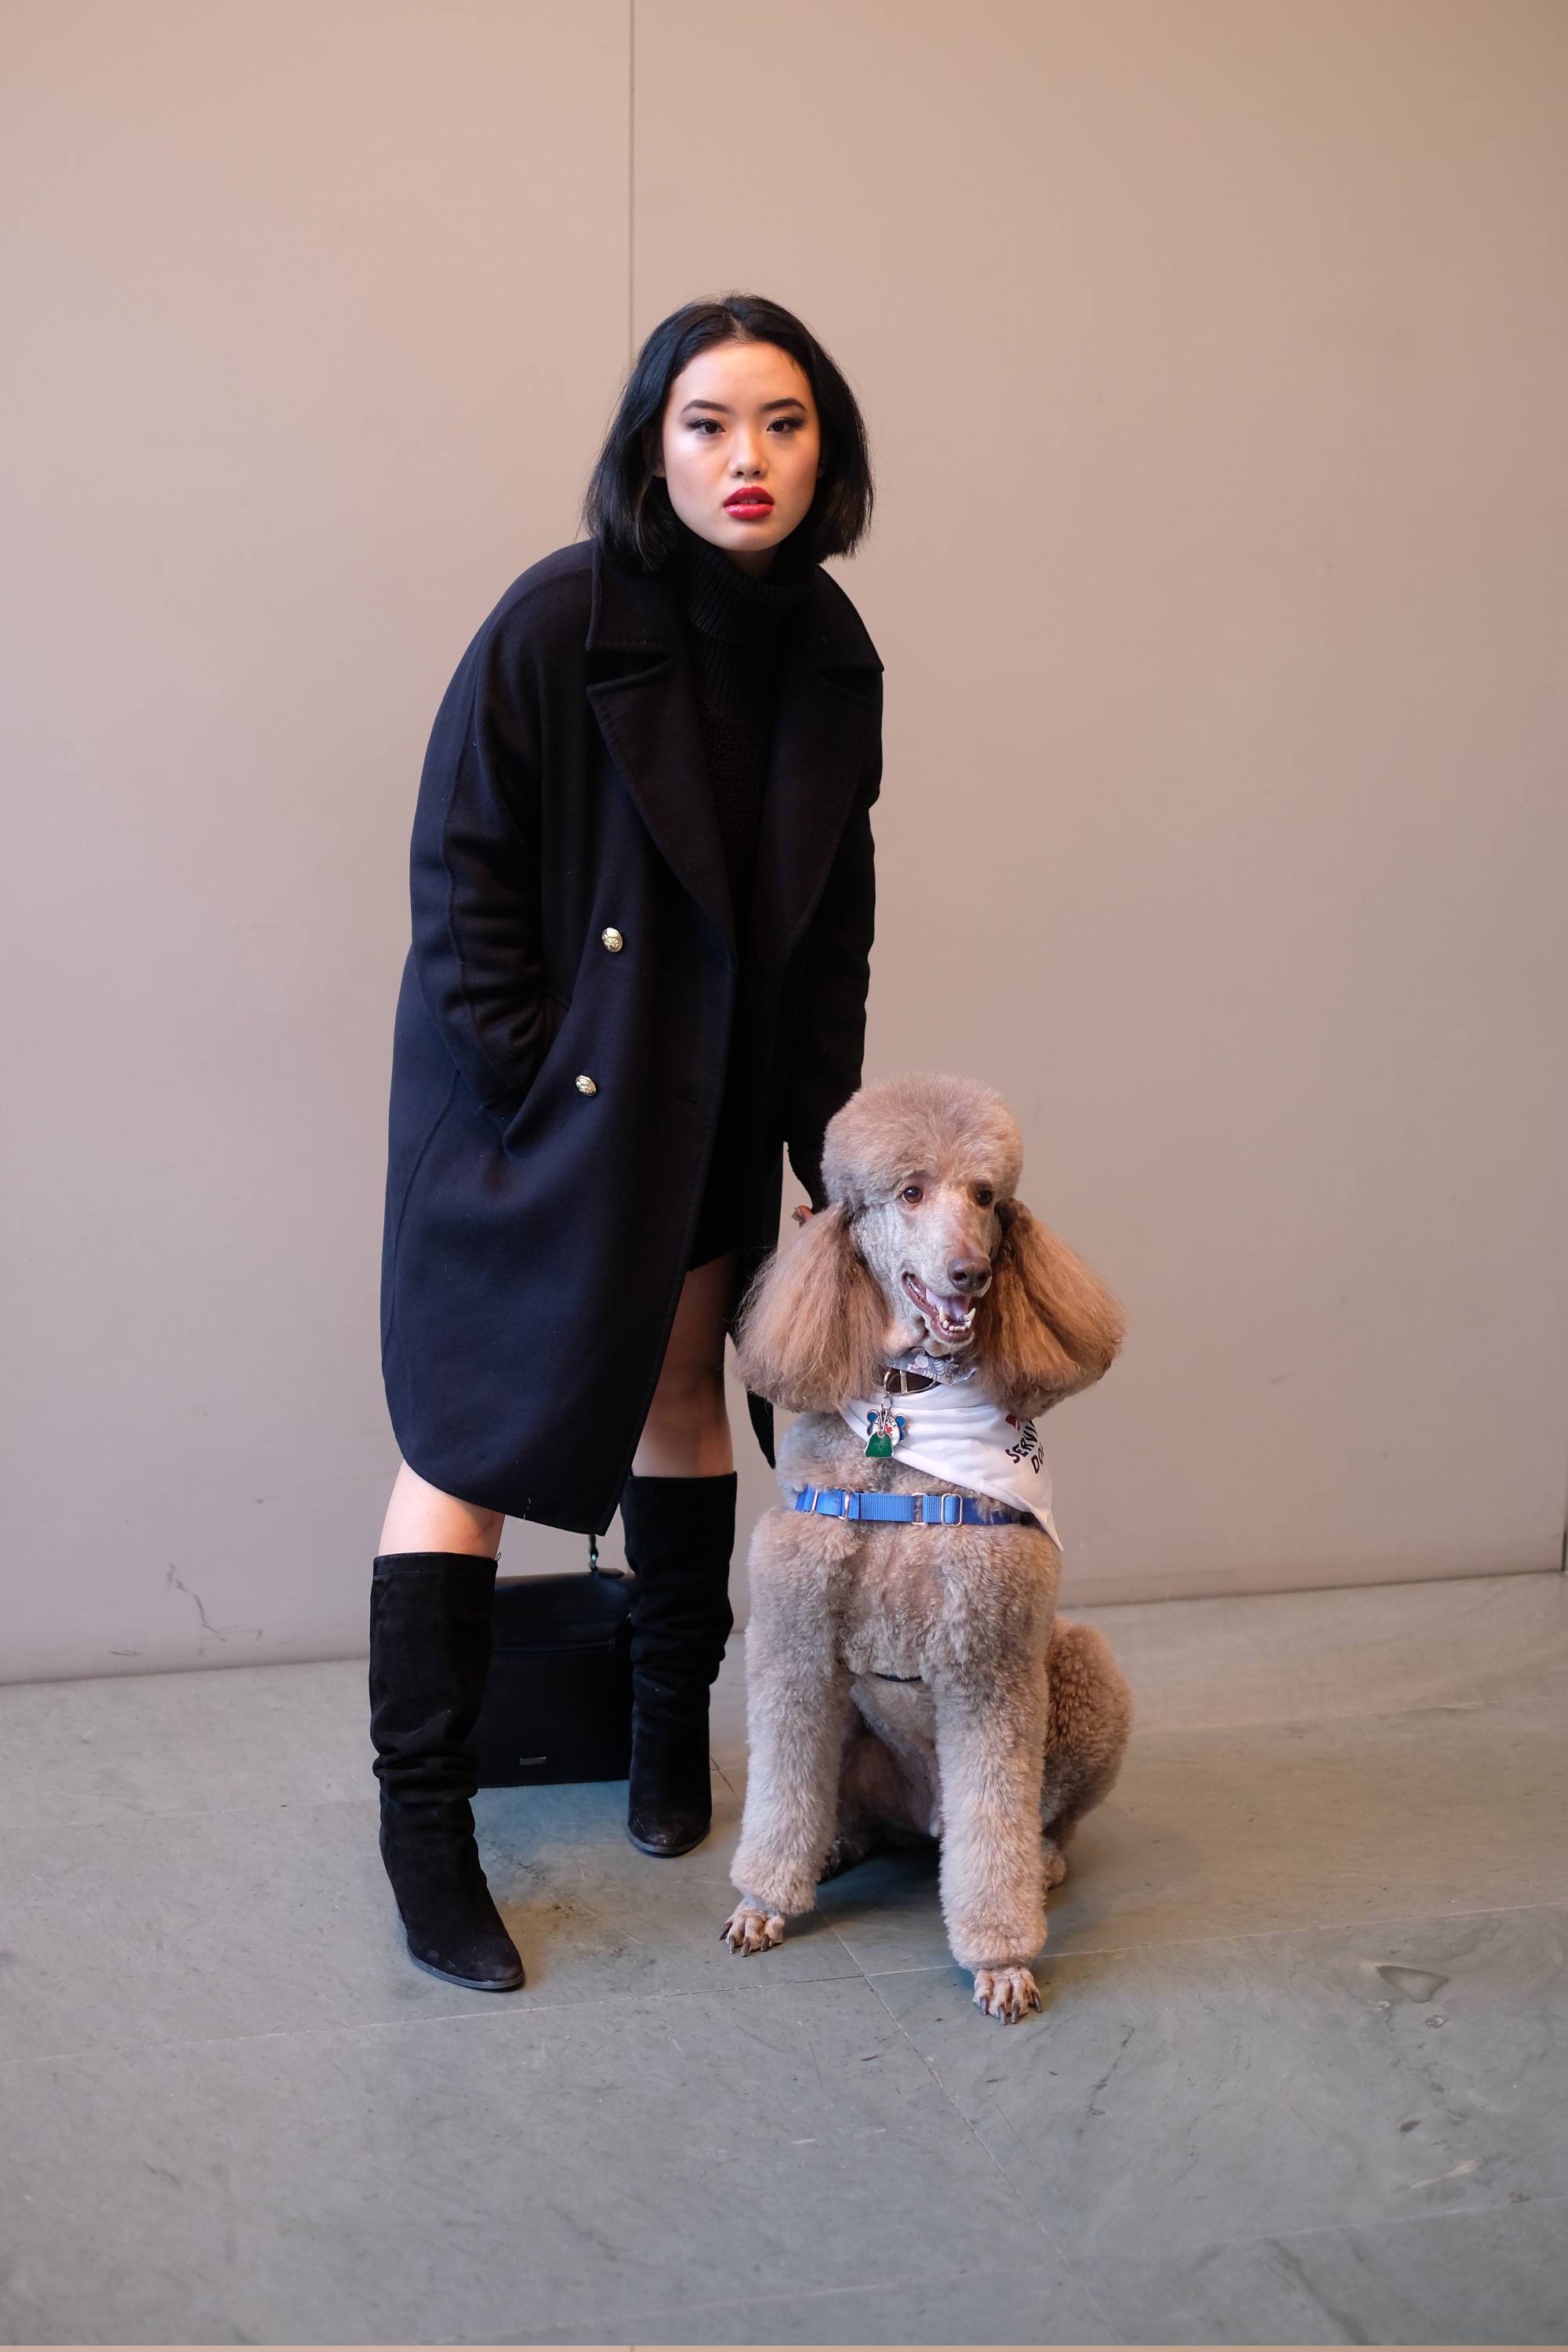 Chinese model with dog